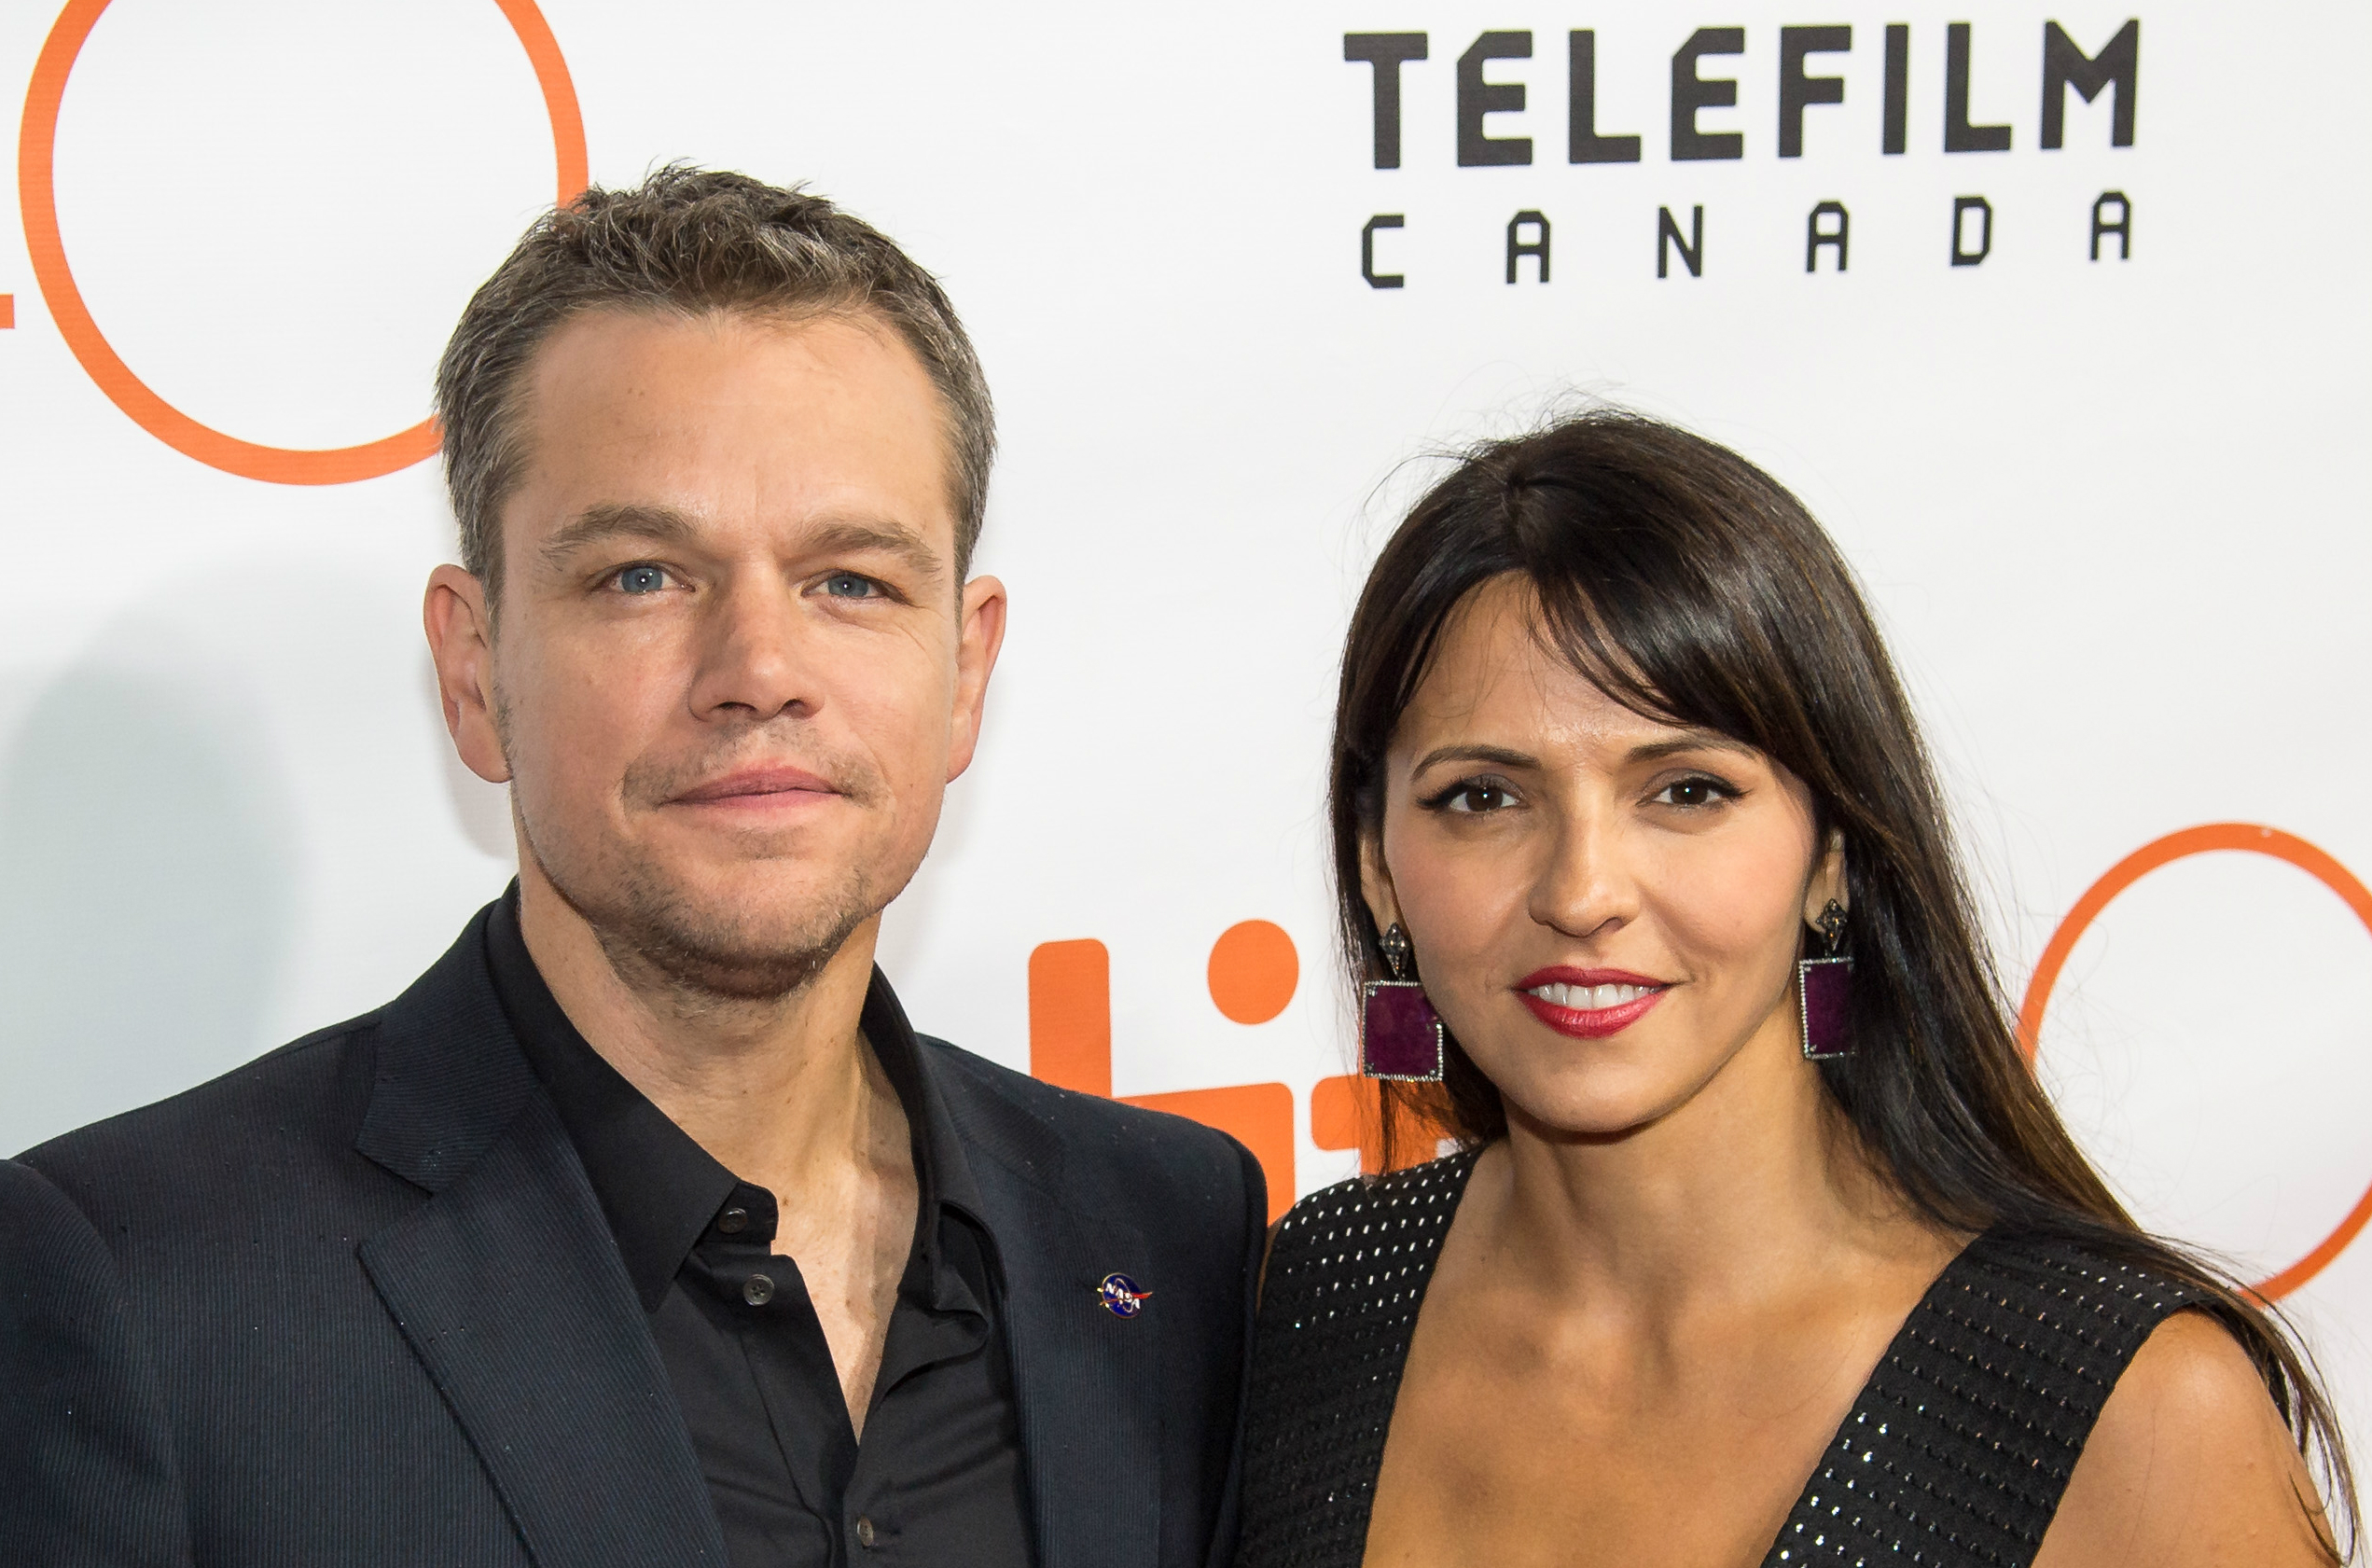 Actor Matt Damon and his wife Luciana Bozán Barroso attend the world premiere for "The Martian”